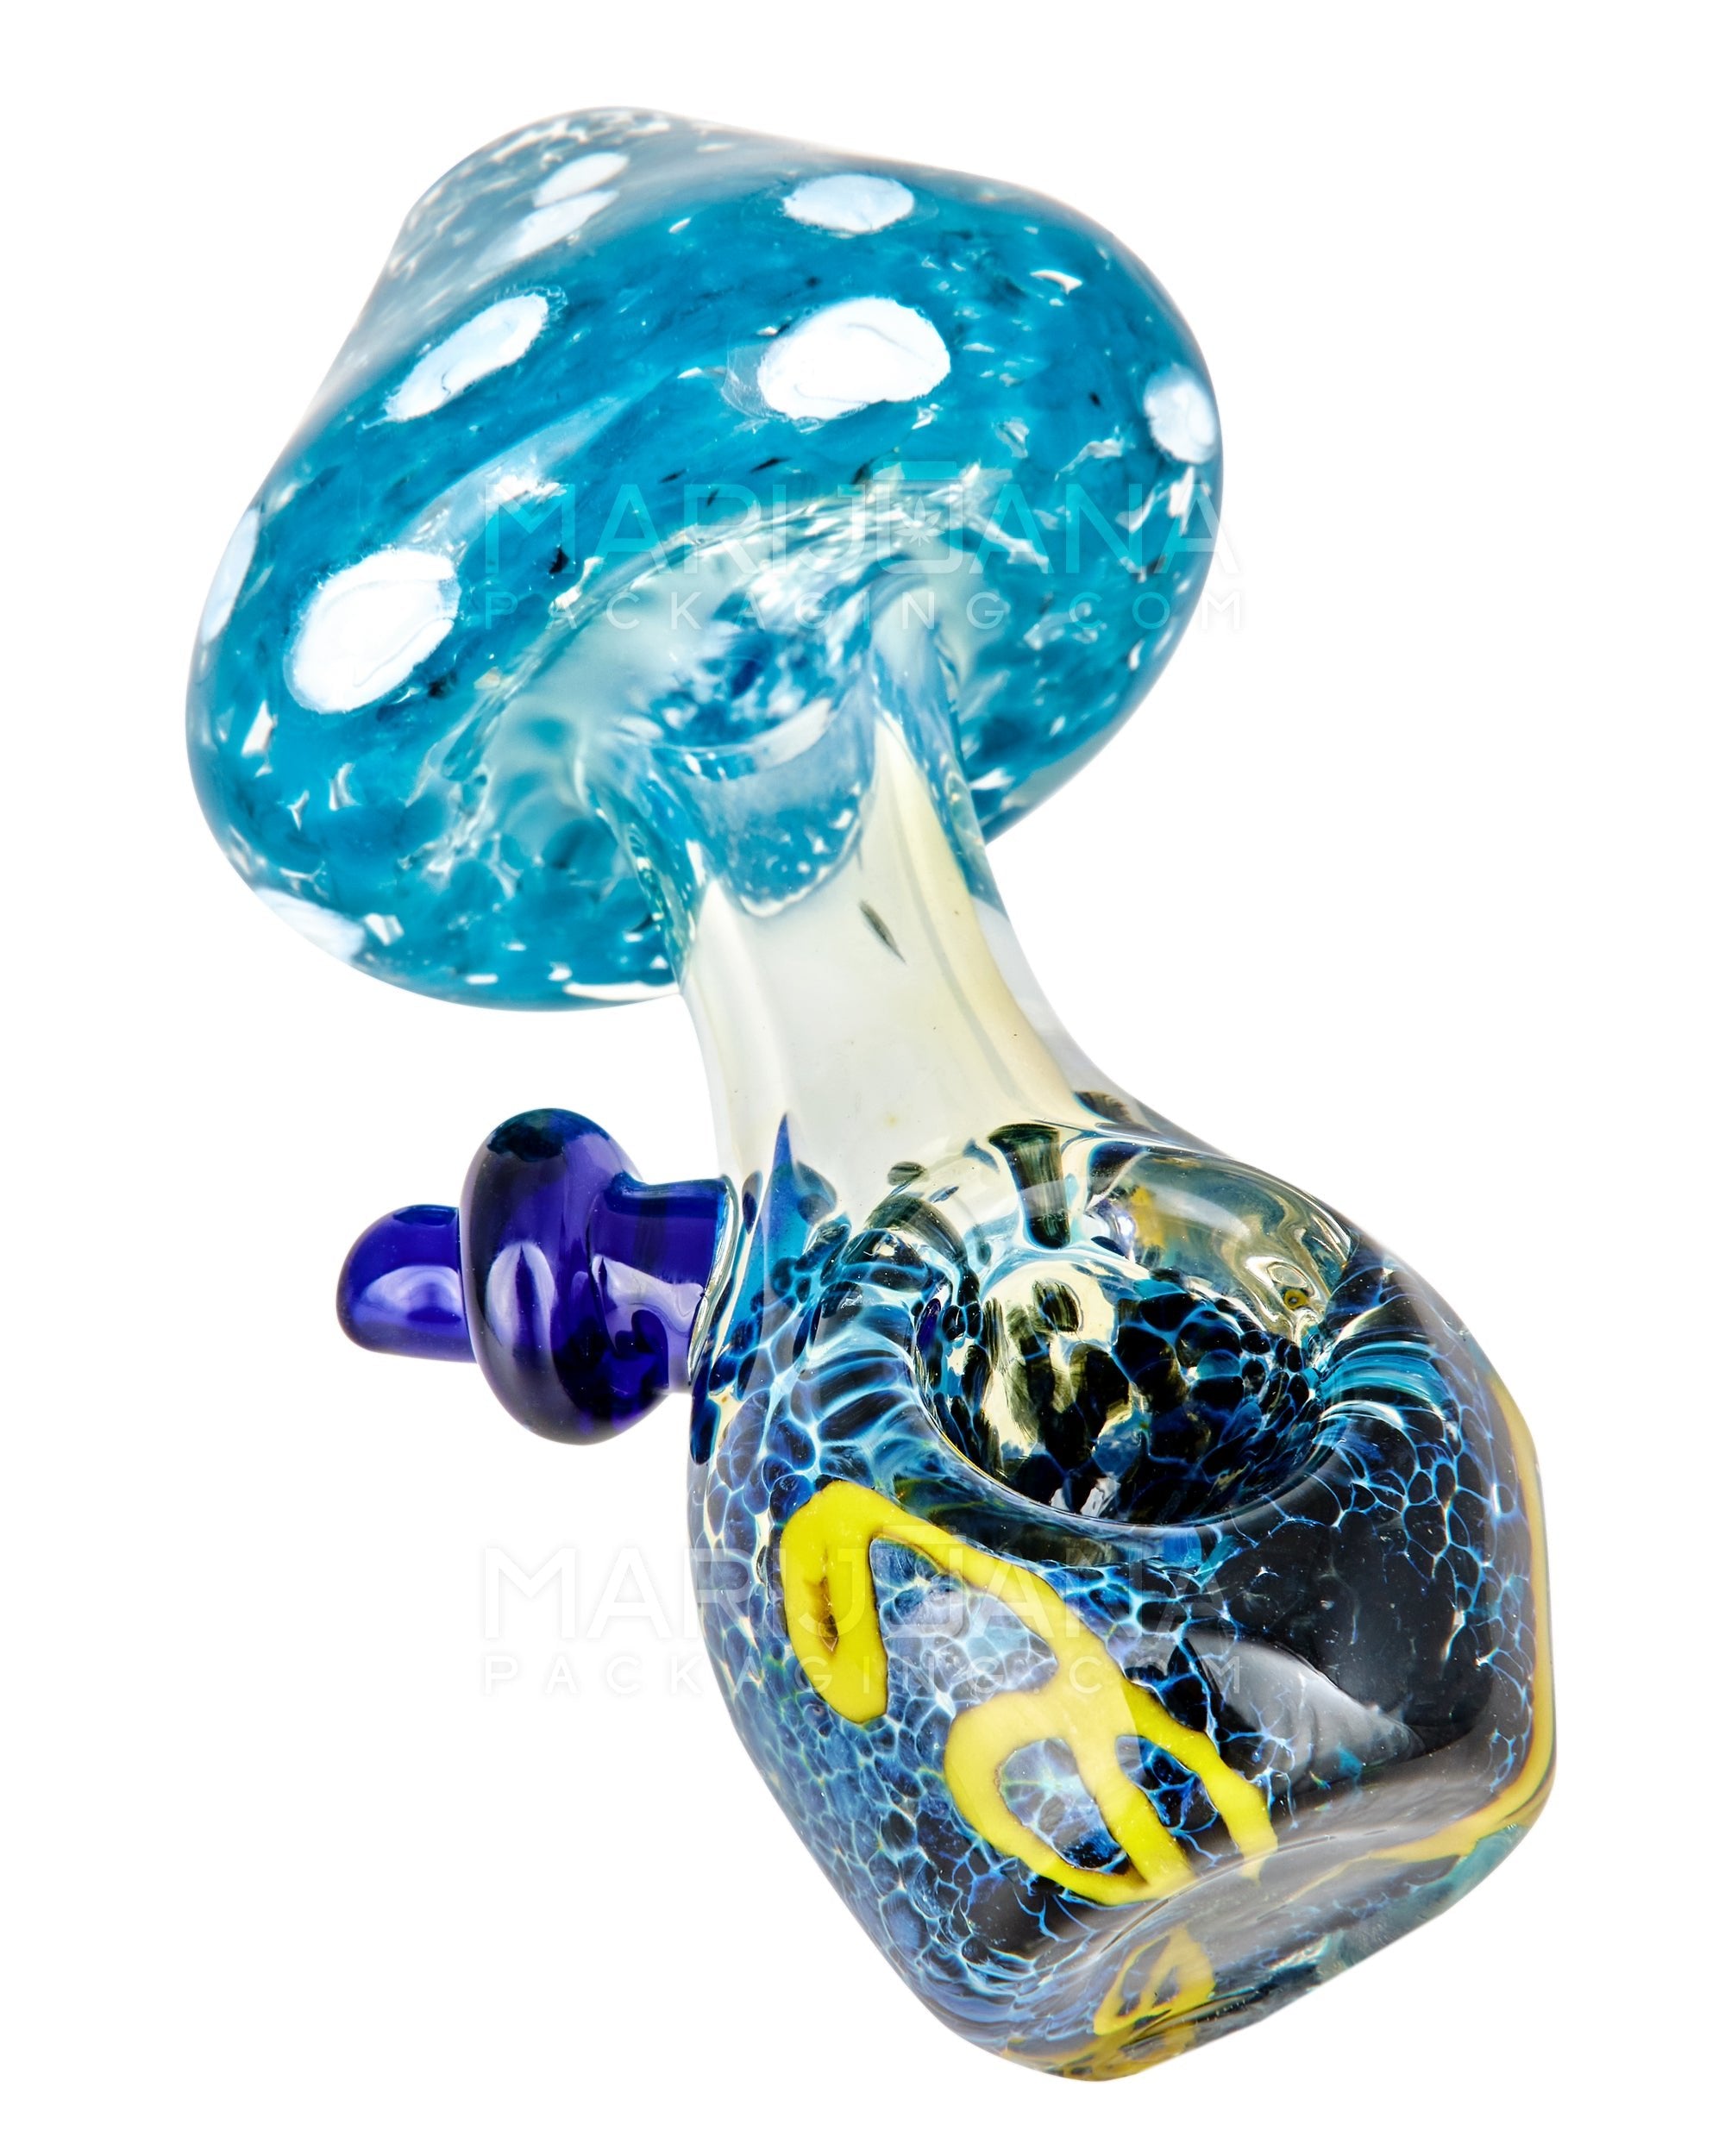 Frit & Multi Fumed Mushroom Hand Pipe w/ Ribboning & Glass Handle | 4in Long - Glass - Assorted - 7